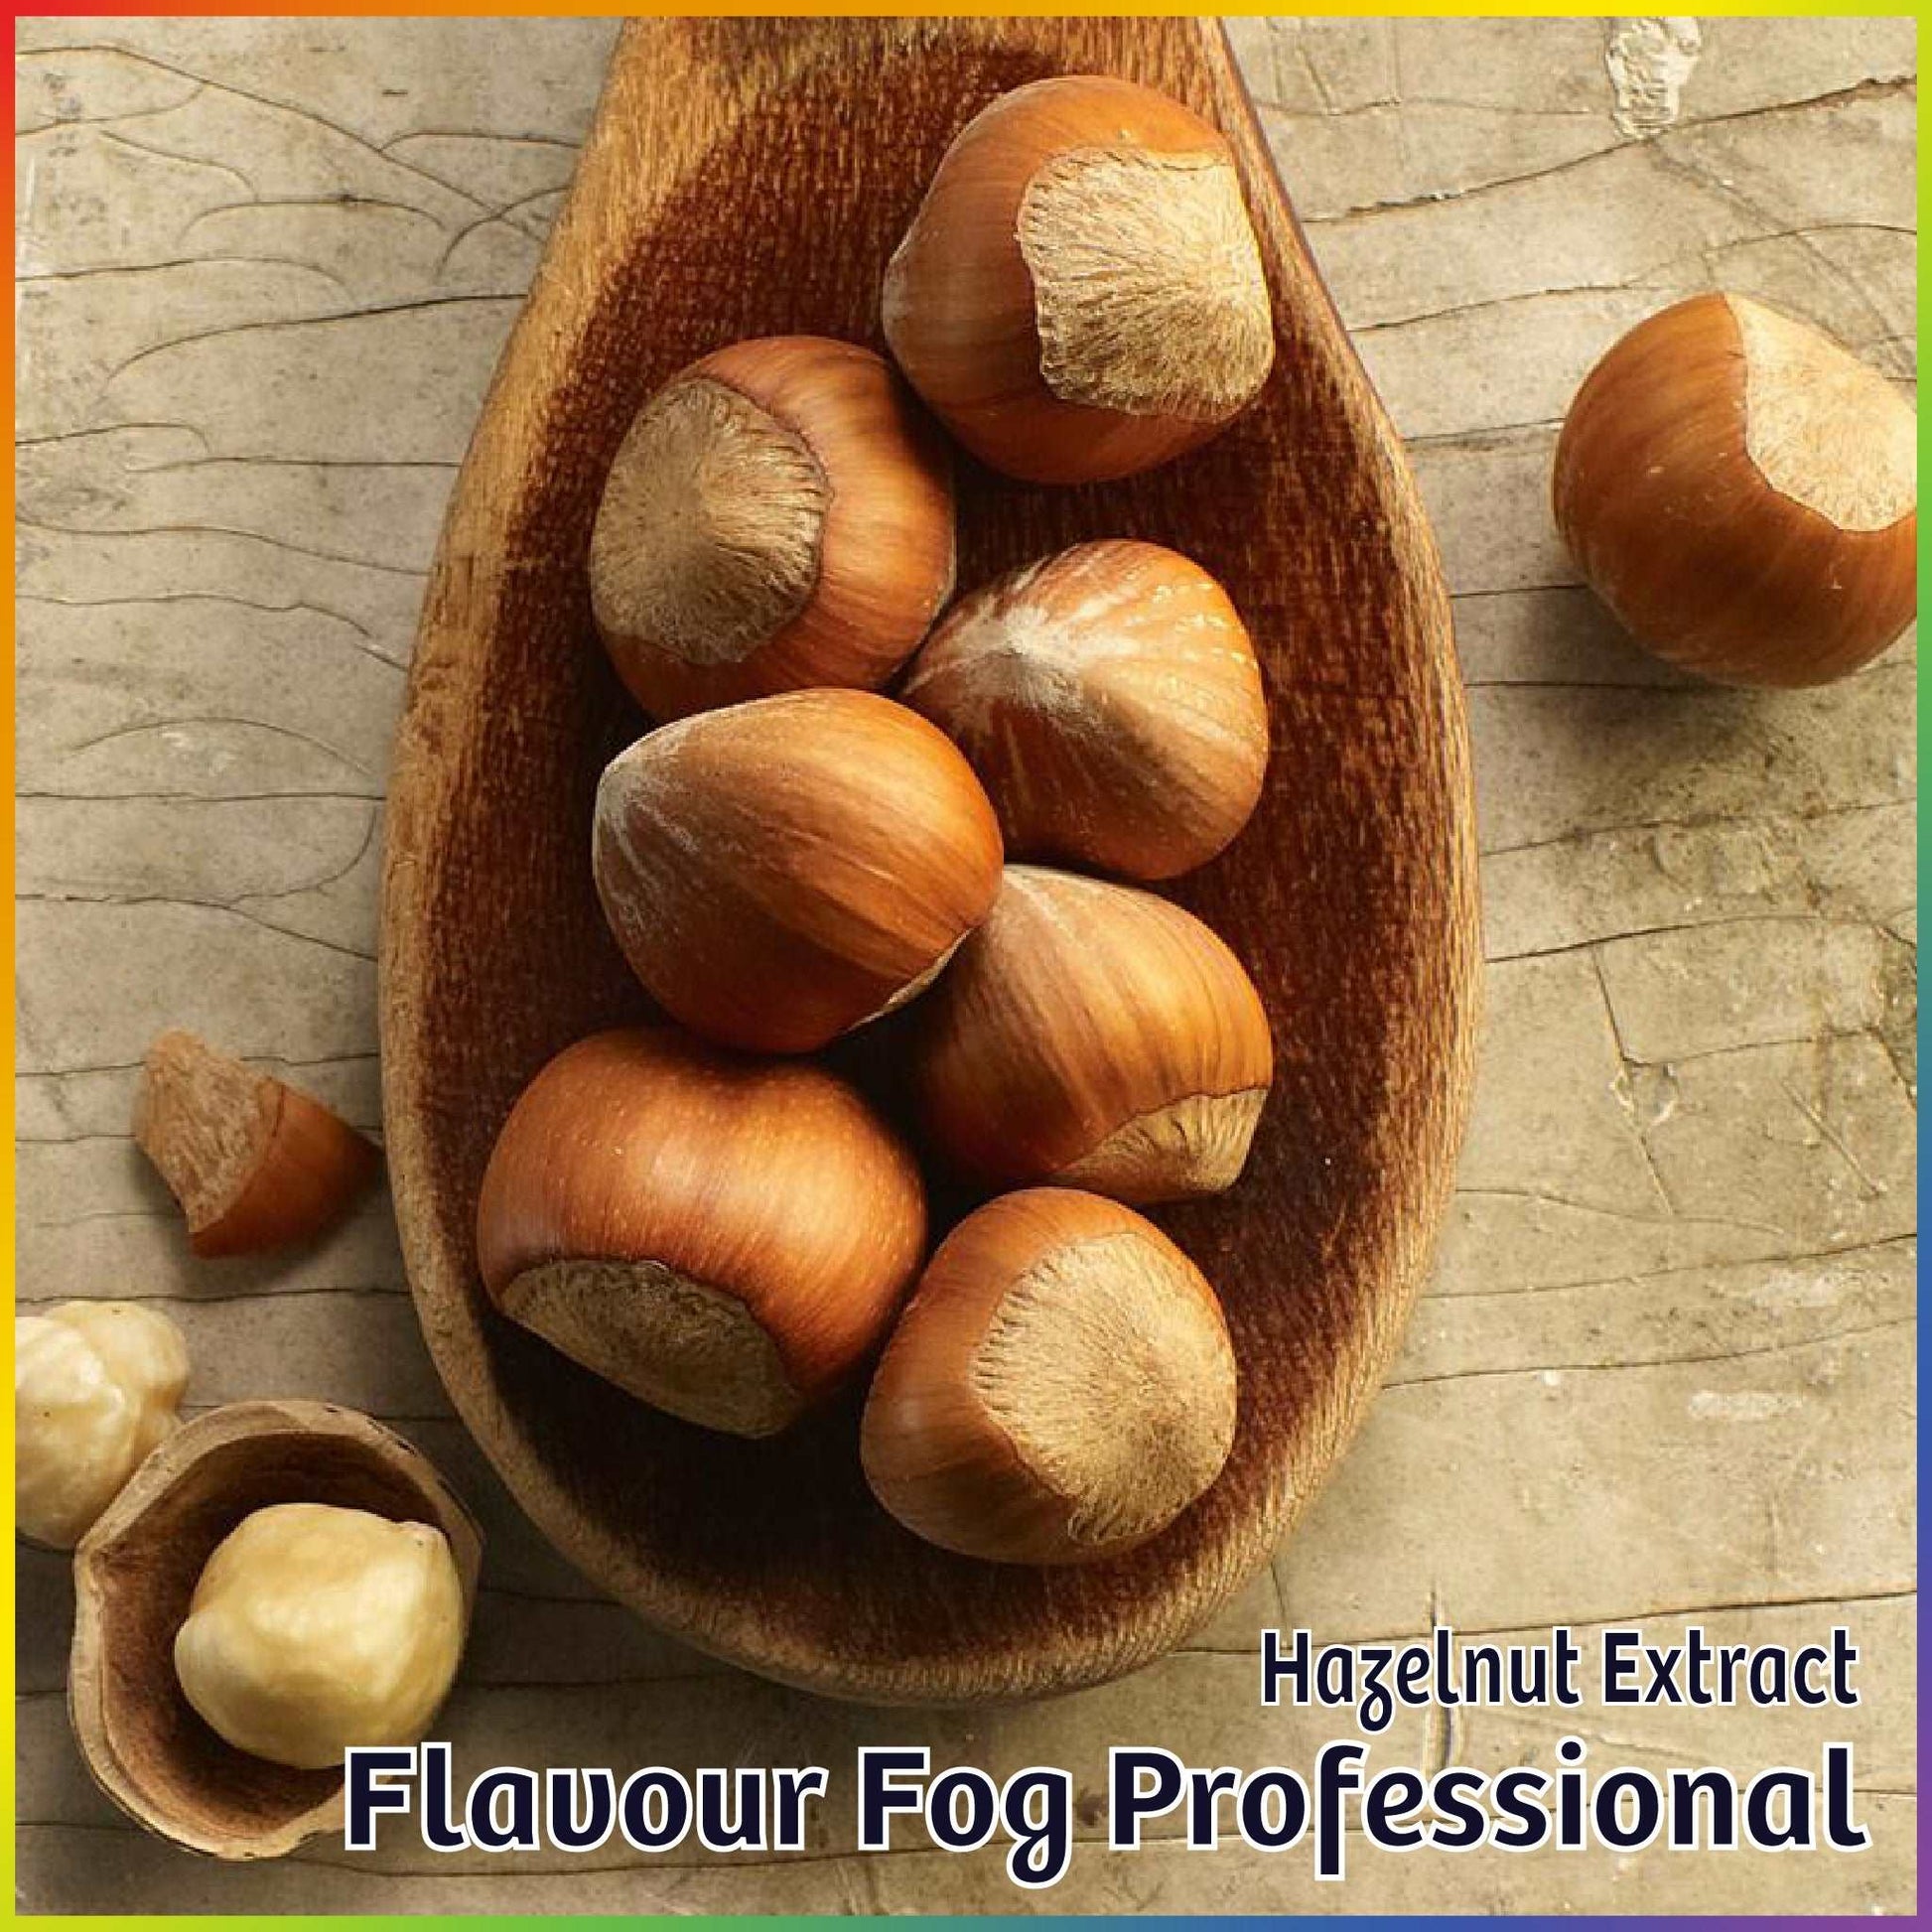 Hazelnut Extract - FF Pro - Flavour Fog - Canada's flavour depot.